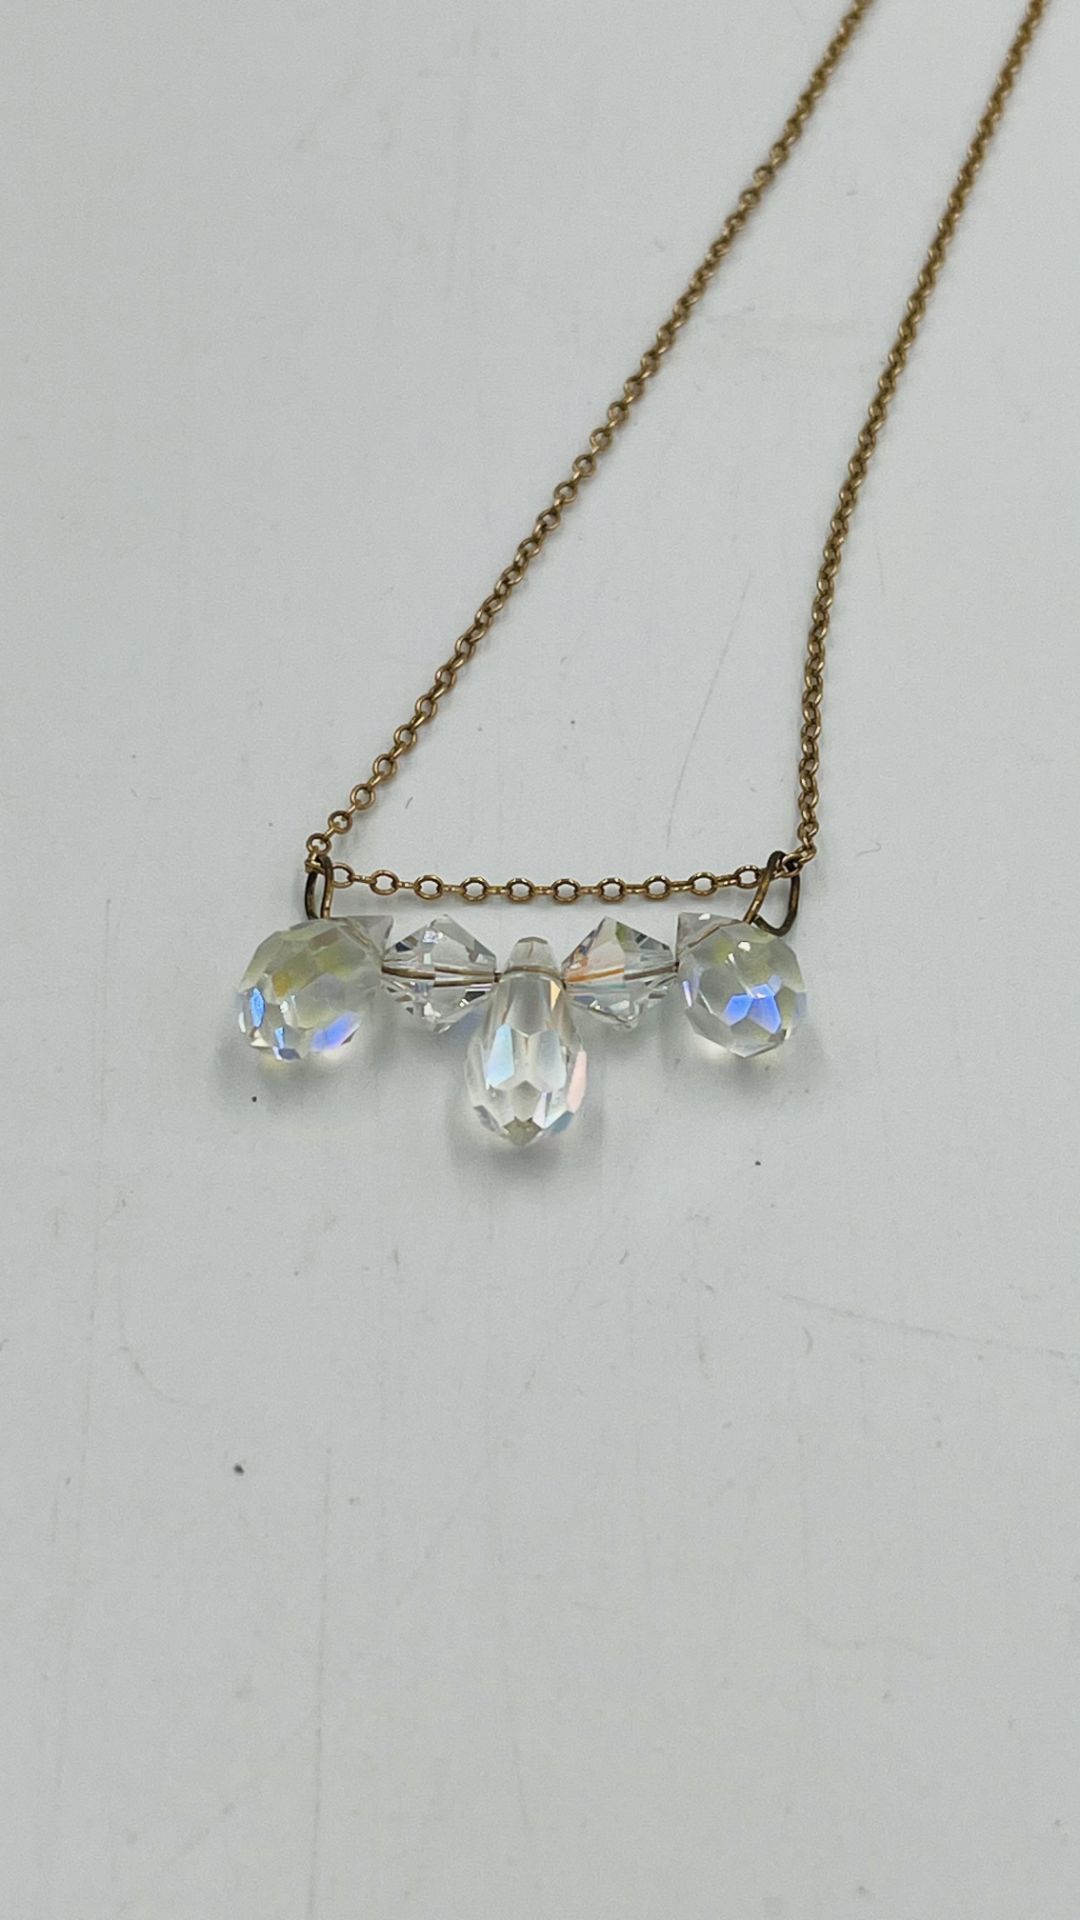 9ct gold chain with pendant - Image 3 of 3